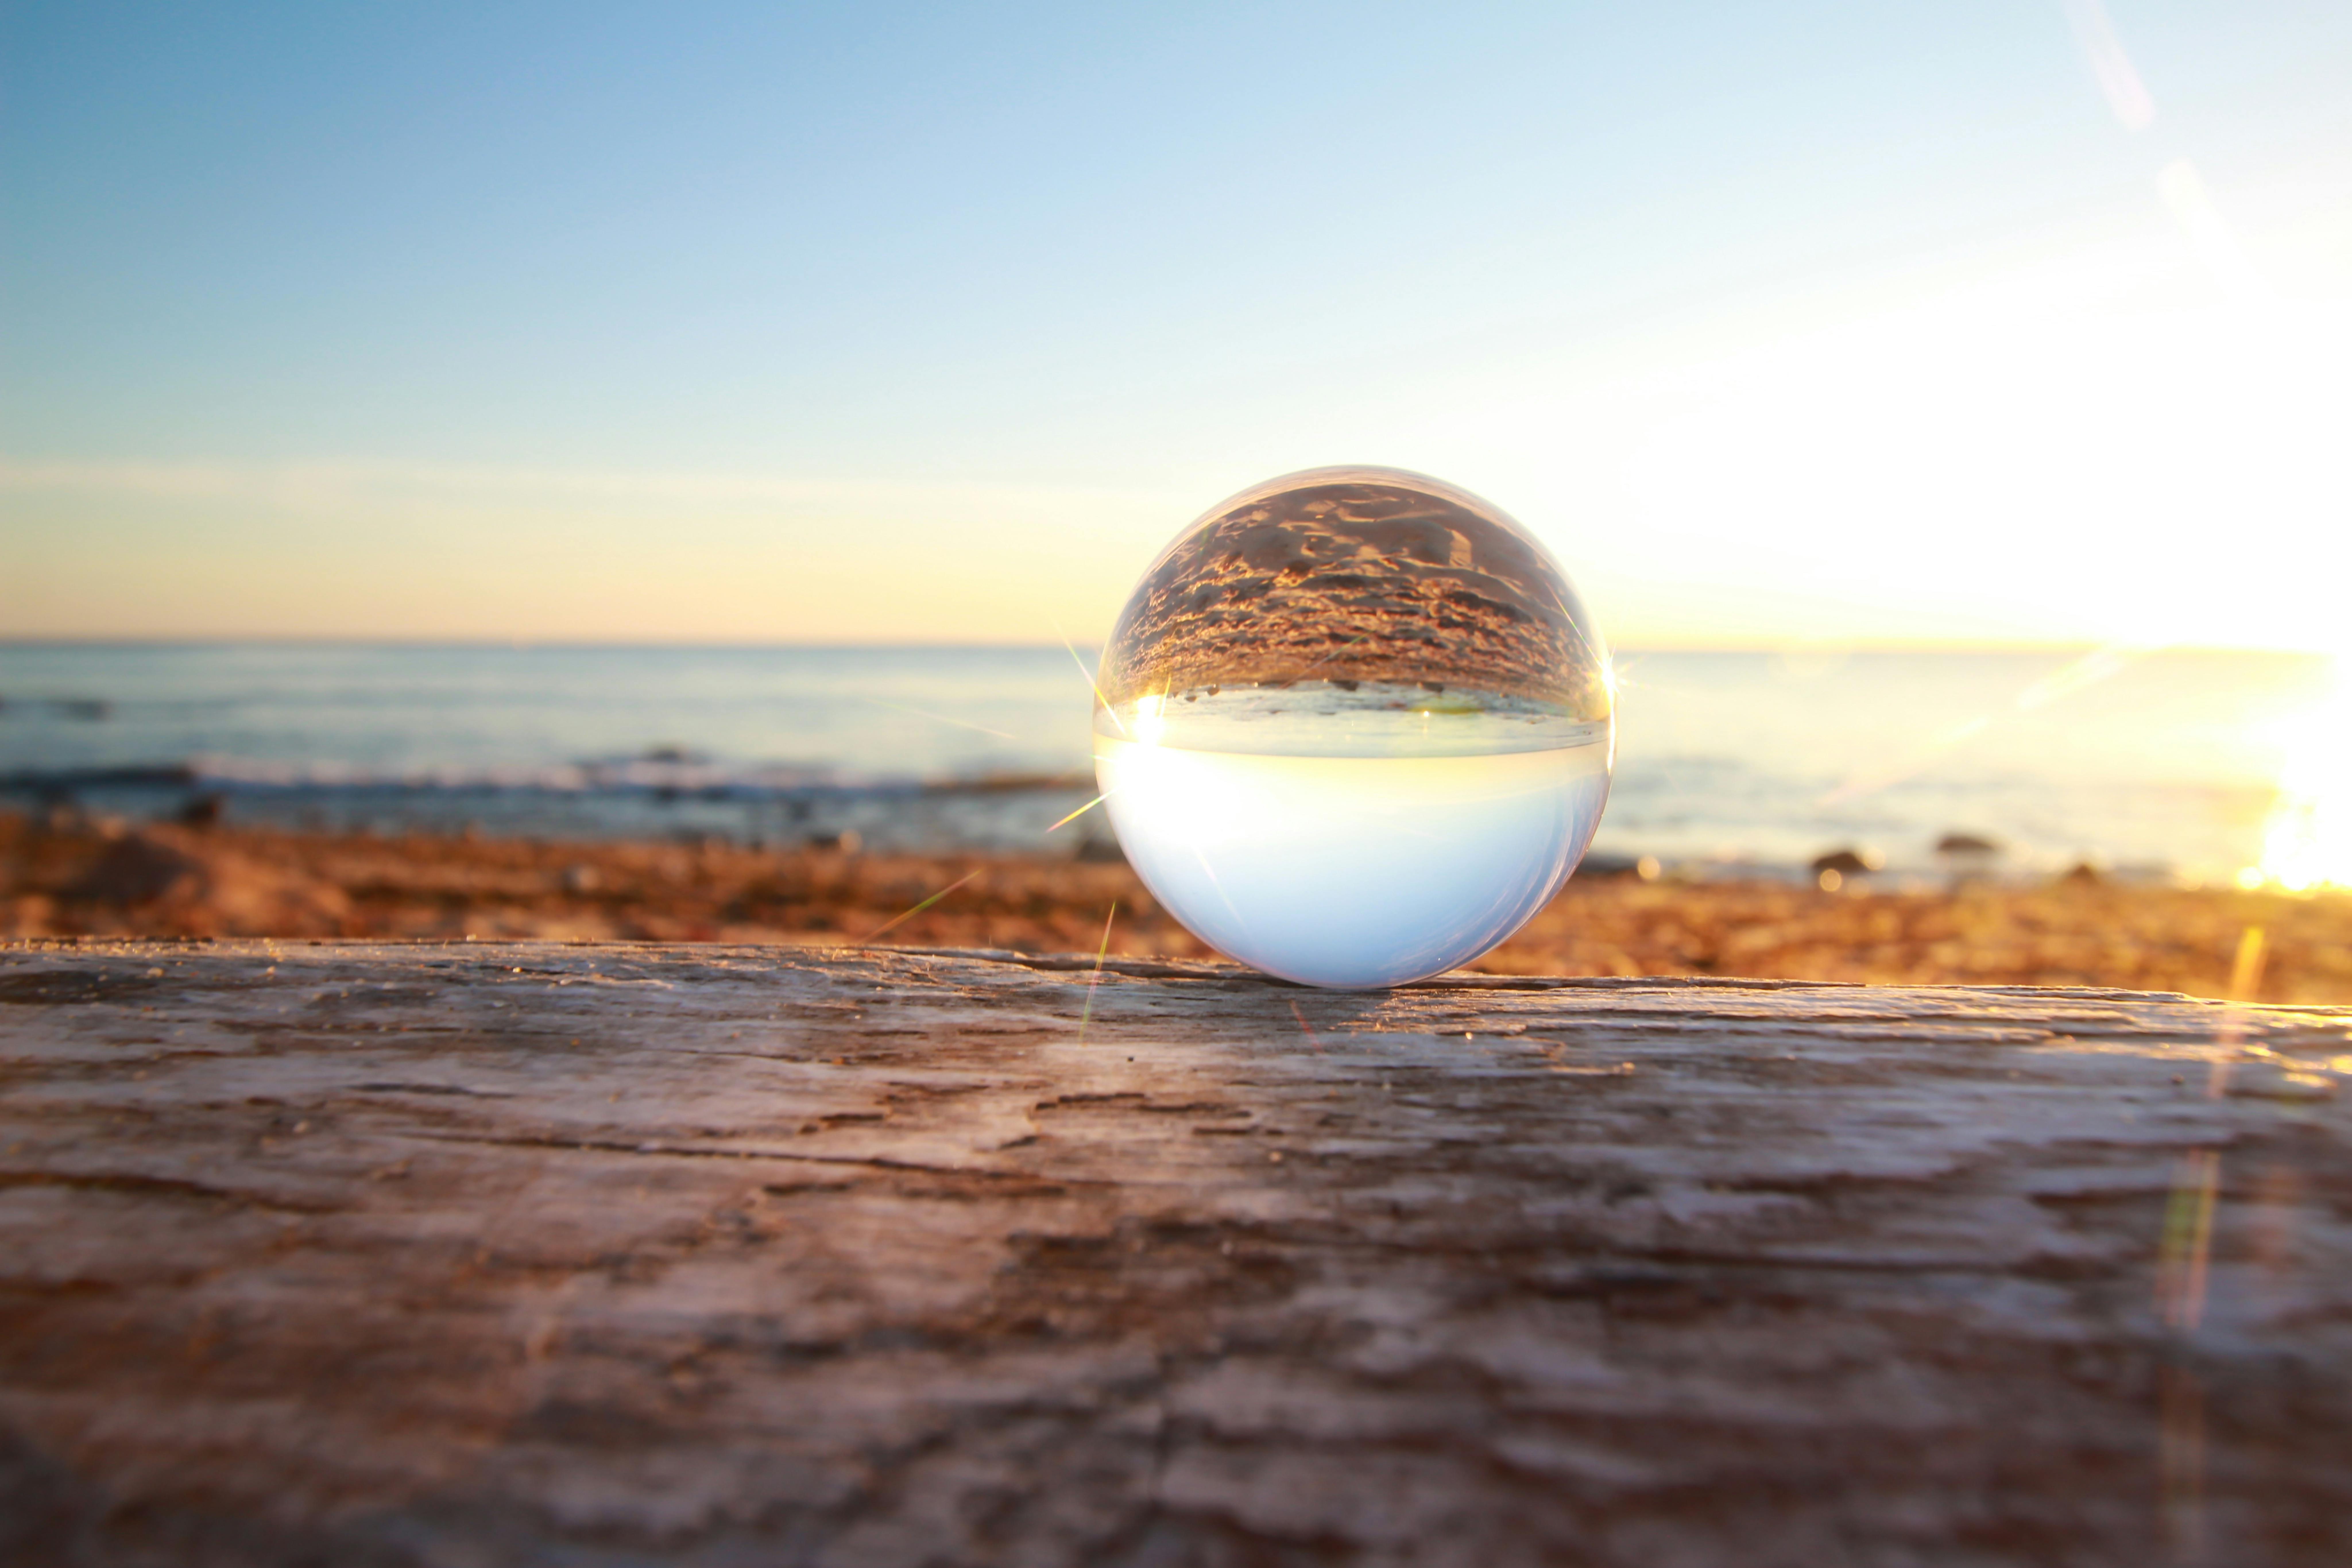 Clear Marble Toy Reflecting Seashore during Golden Hour